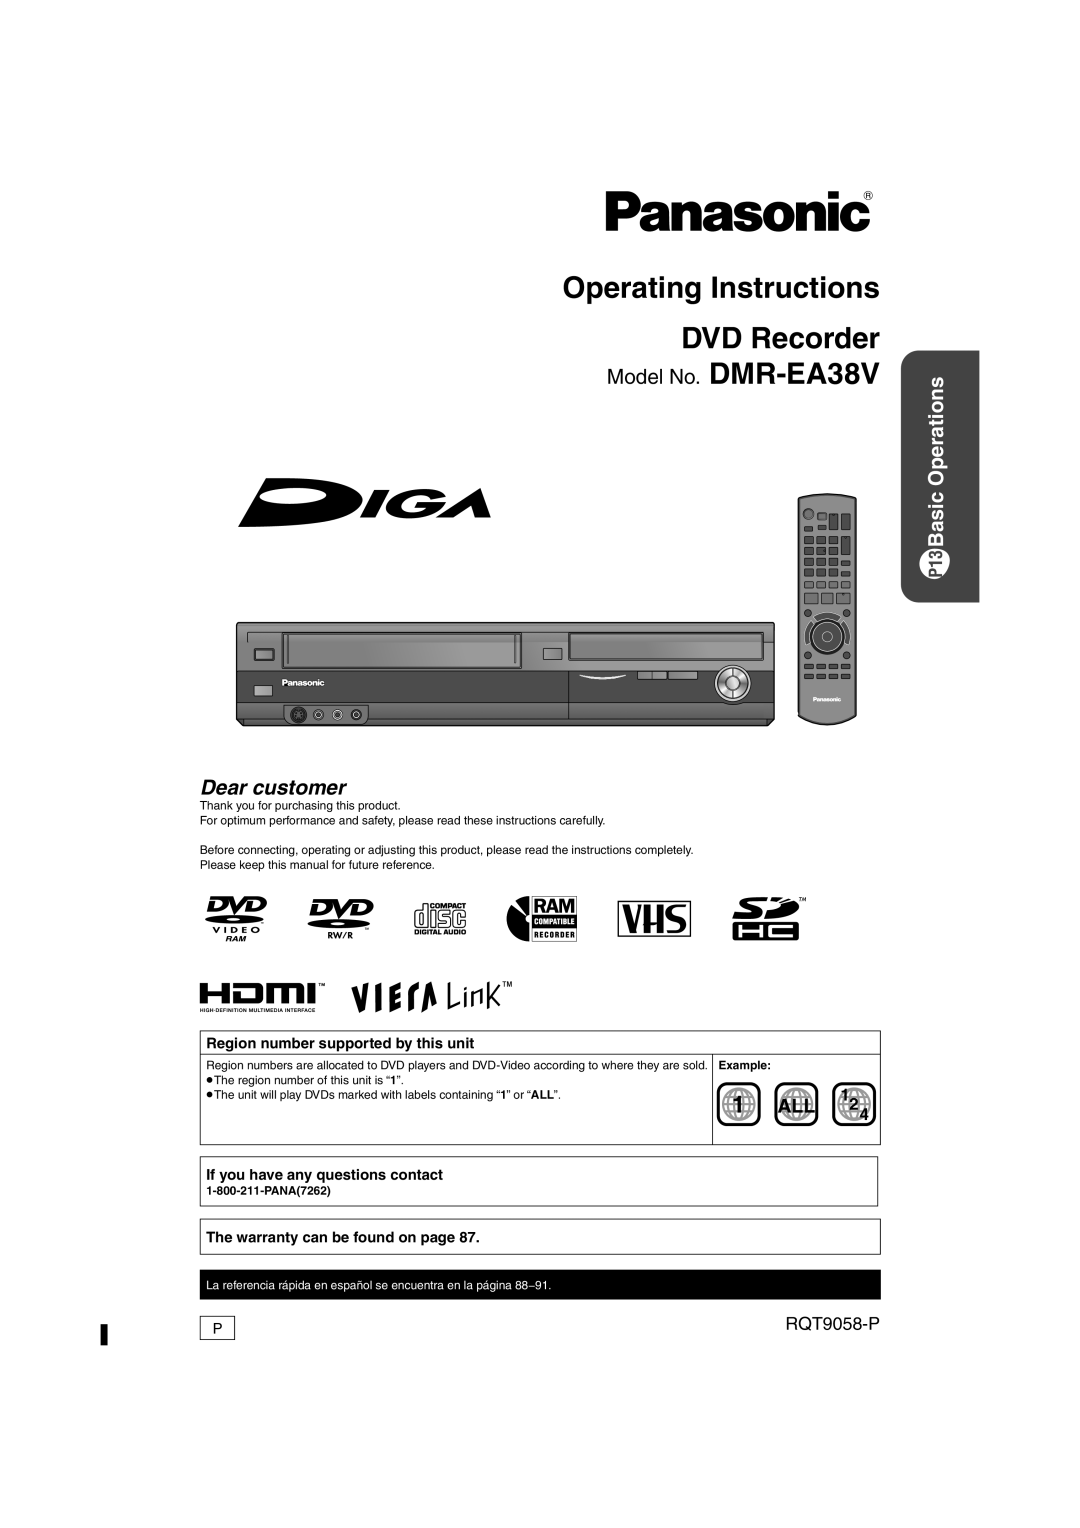 Panasonic DMR-EA38V warranty RQT9058-P, Region number supported by this unit, If you have any questions contact 